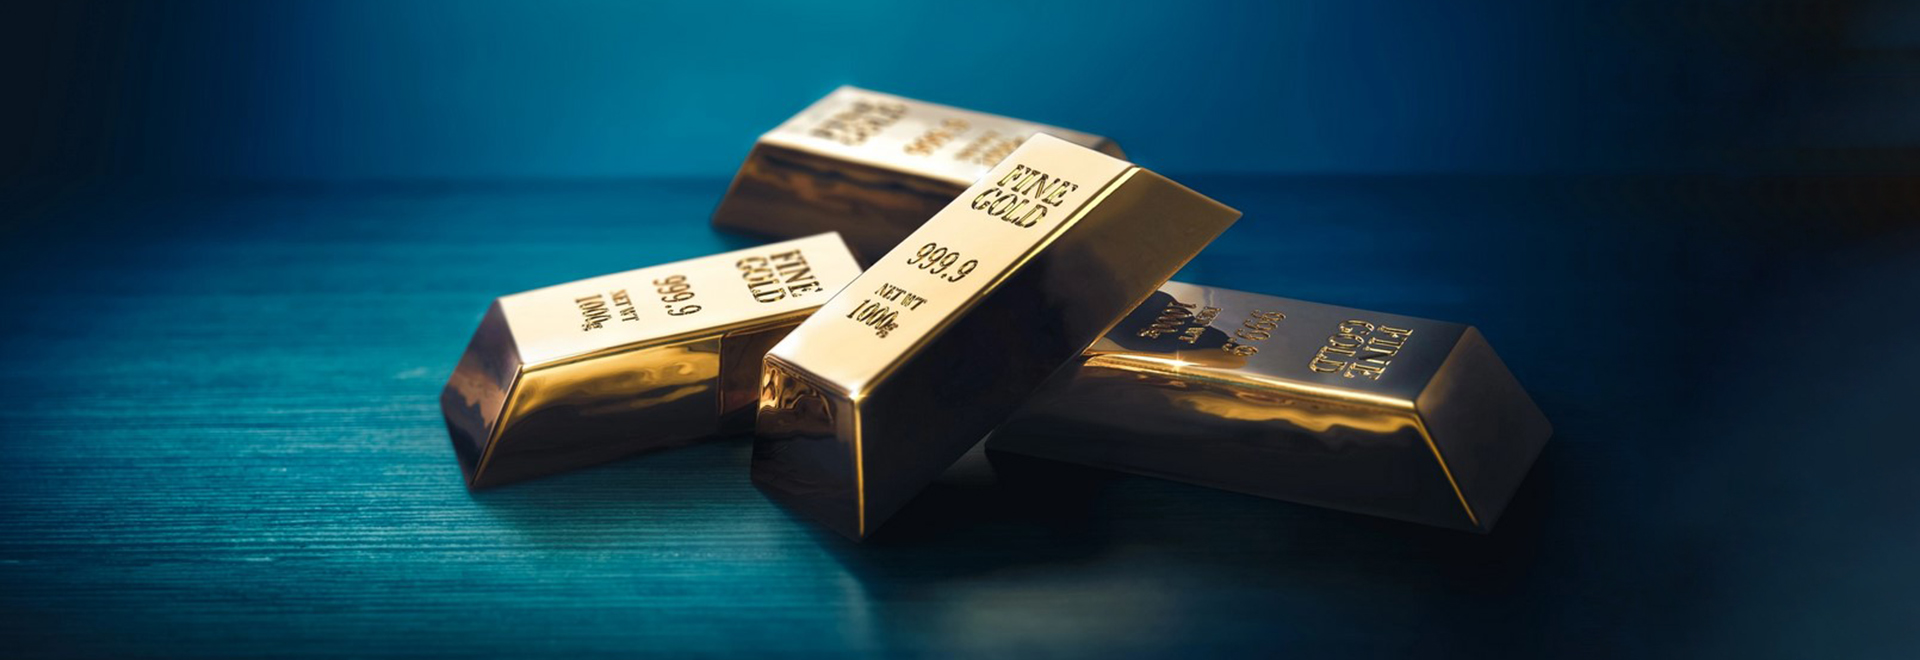 Fluctuations In The Gold Market Can Influence Currency Values